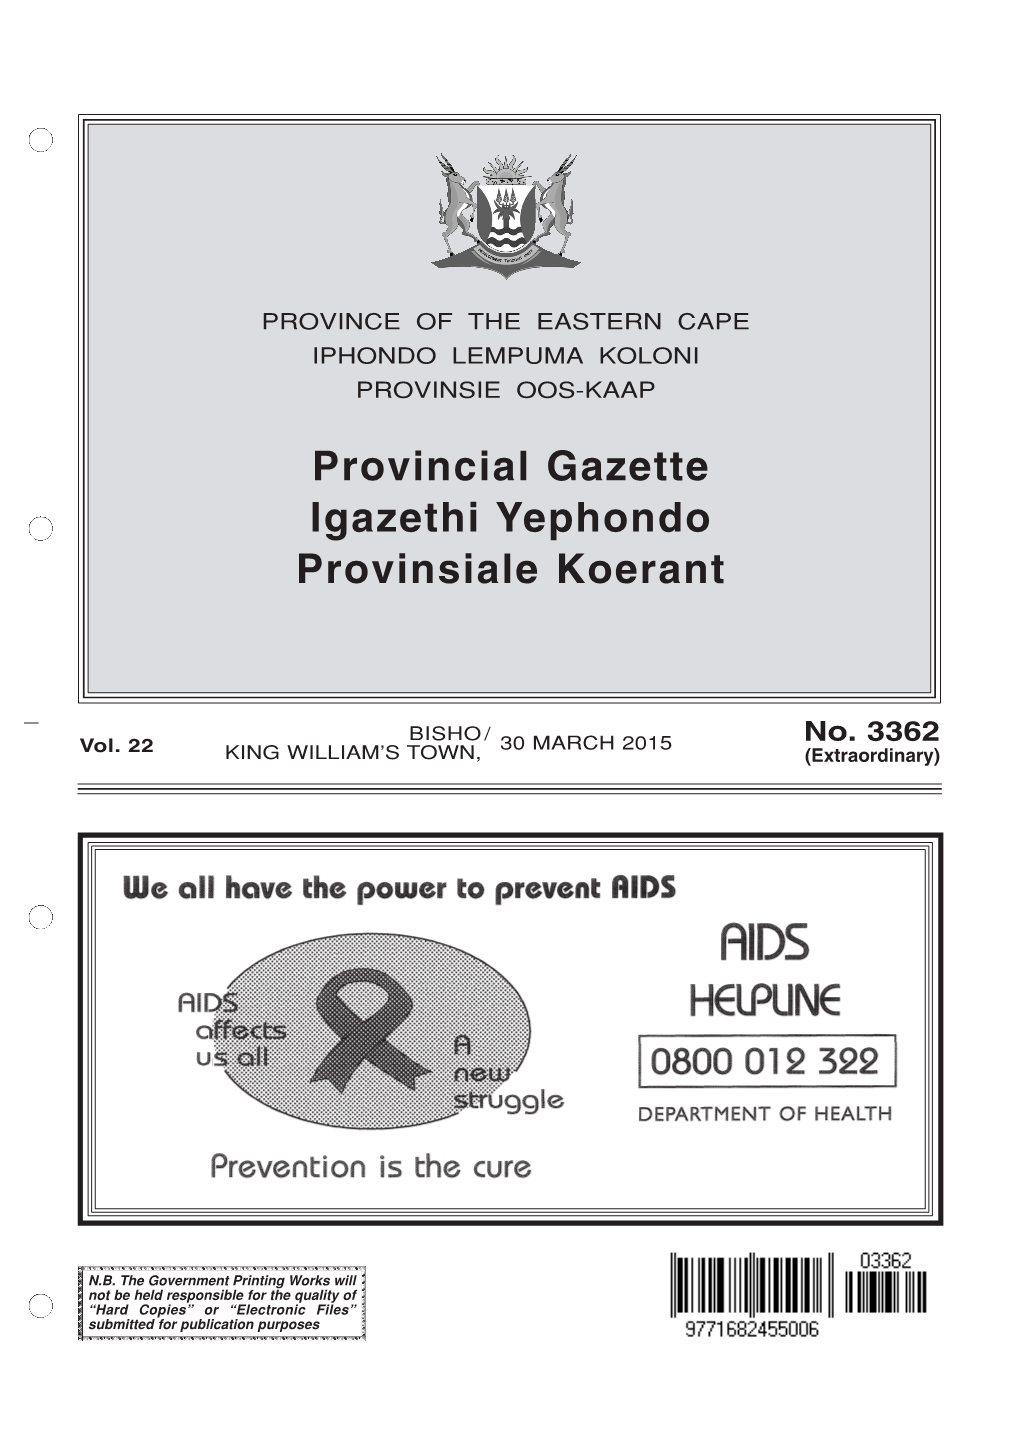 Provincial Gazette for Eastern Cape No 3362 of 30-March-2015, Volume